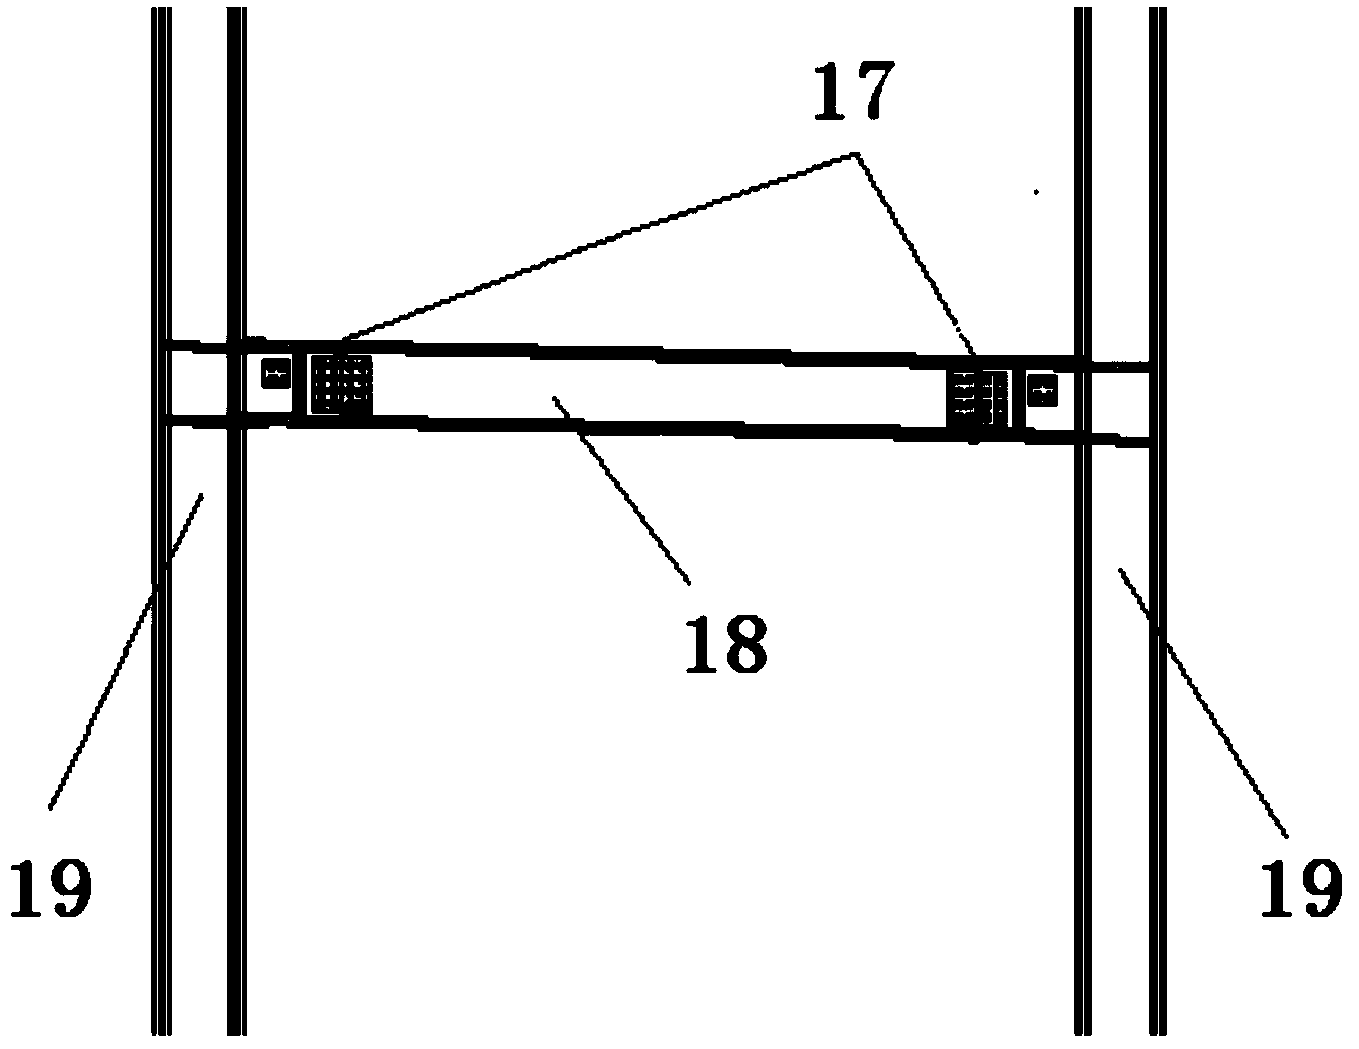 Method for achieving steel structure pre-assembling through computer simulation